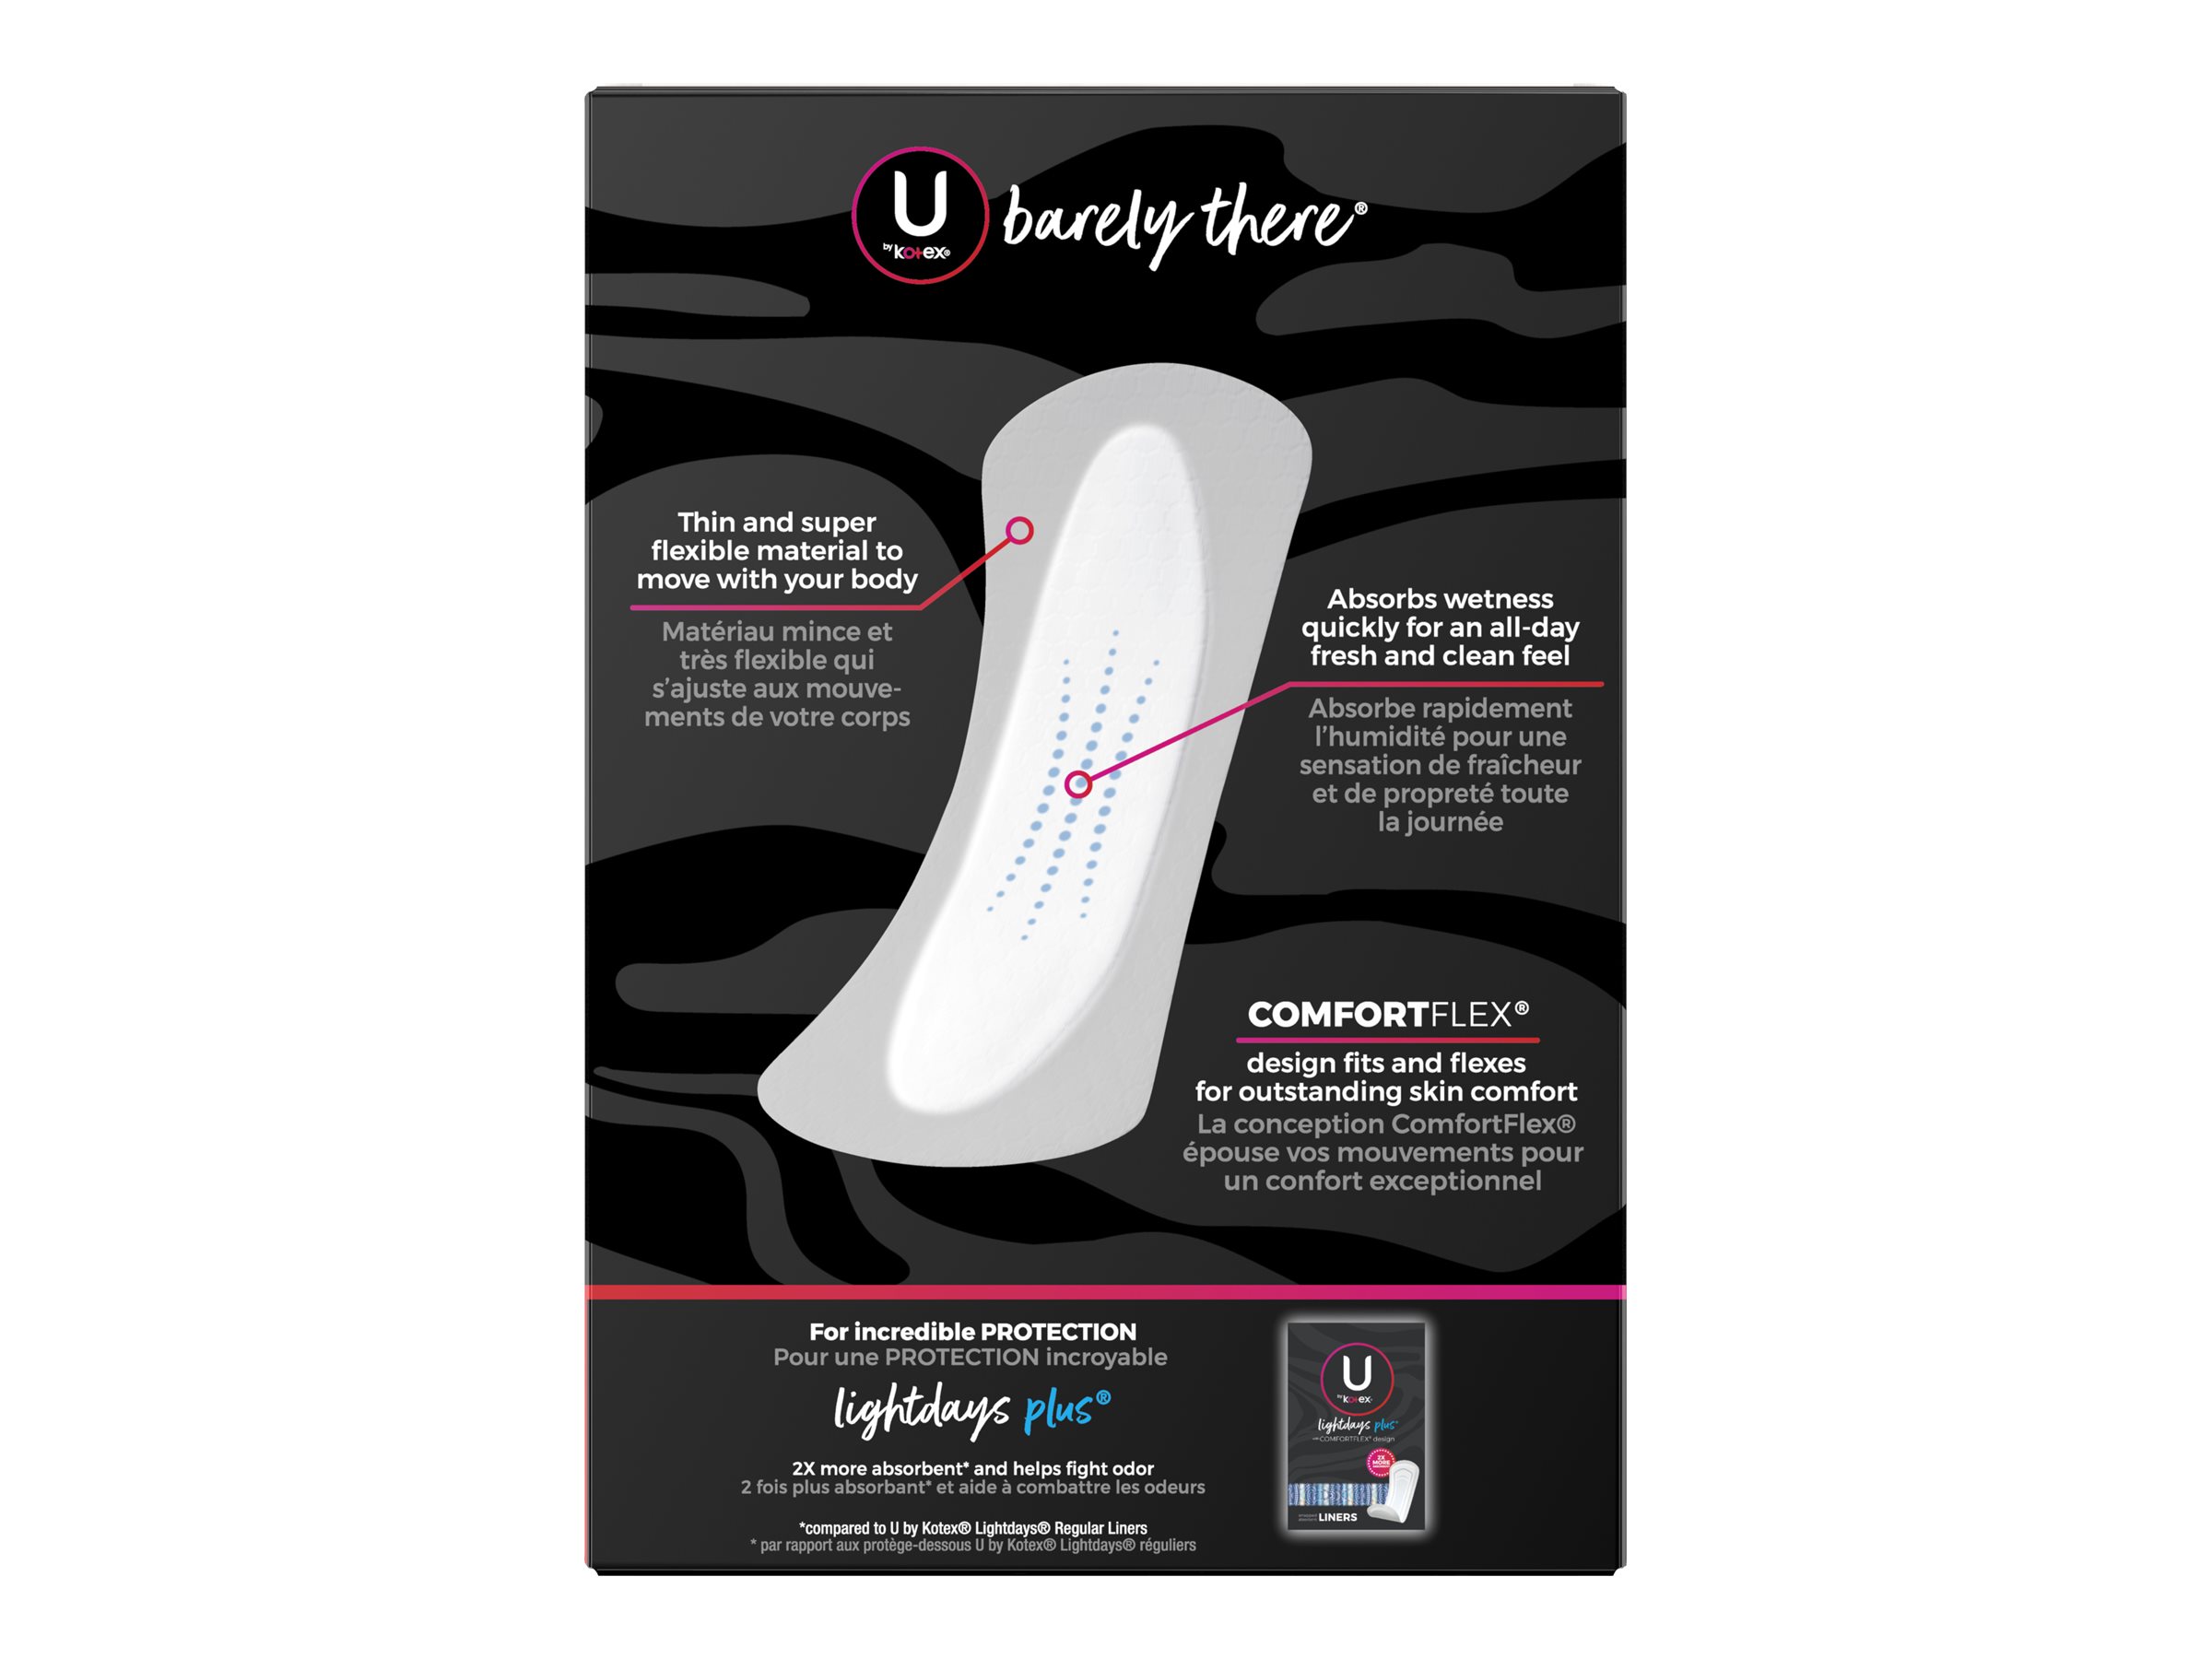 U By Kotex Balance Daily Wrapped Panty Liners - Light Absorbency, 50 Ct